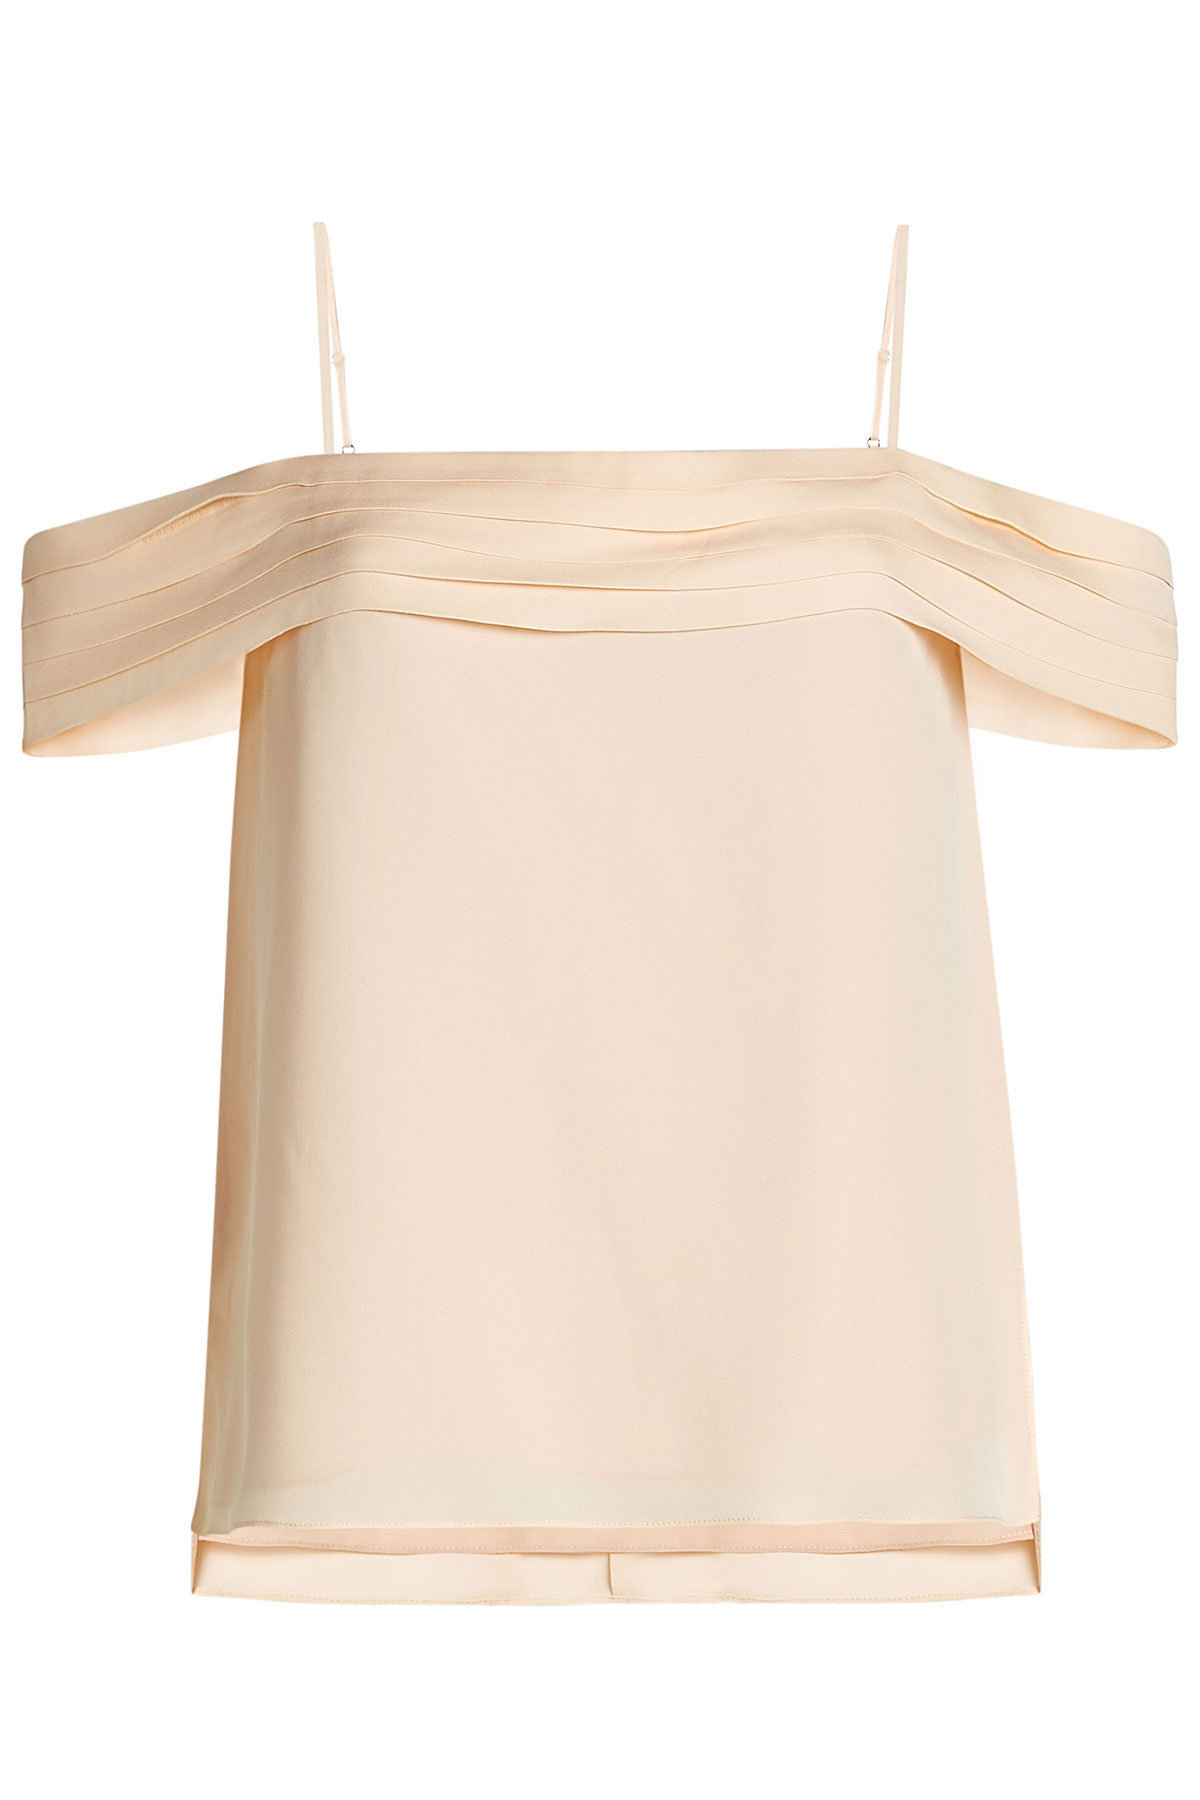 T by Alexander Wang - Silk Top with Cold Shoulder Sleeves